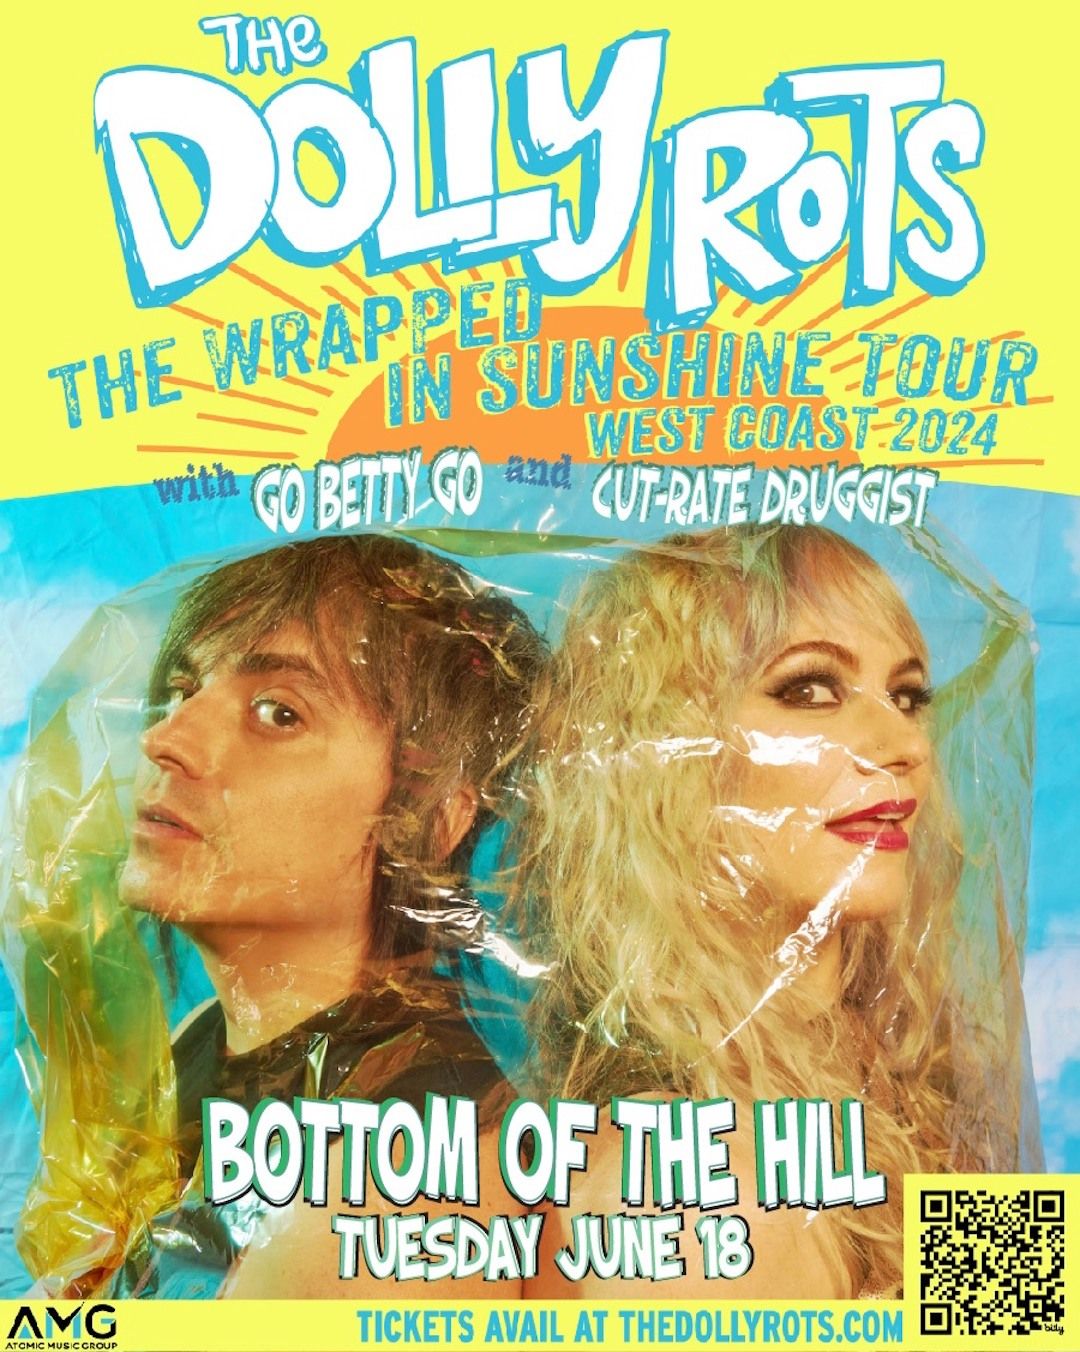 The Dollyrots ~ Go Betty Go ~ Cut-Rate Druggist